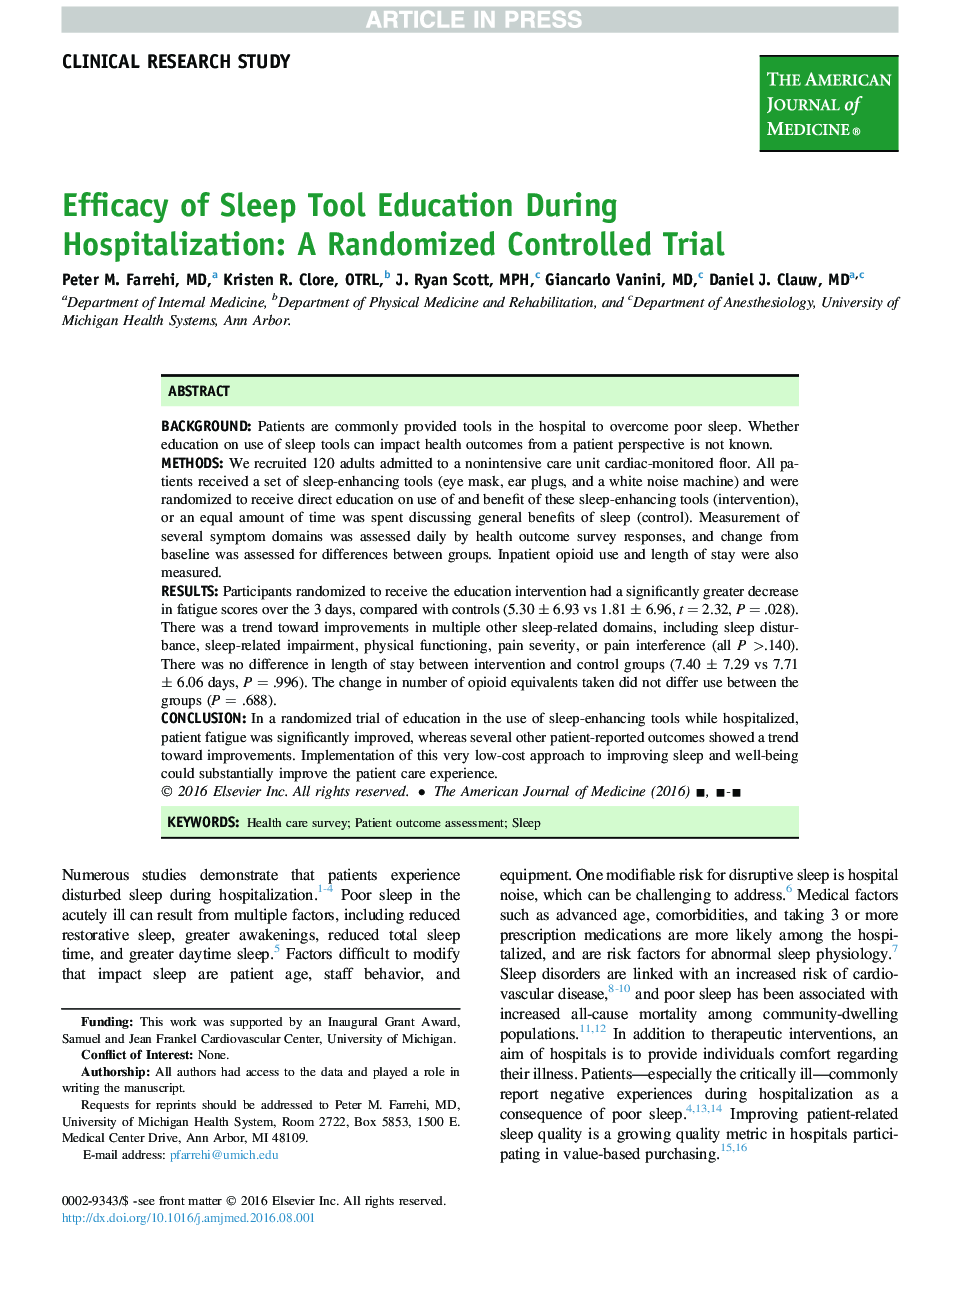 Efficacy of Sleep Tool Education During Hospitalization: A Randomized Controlled Trial